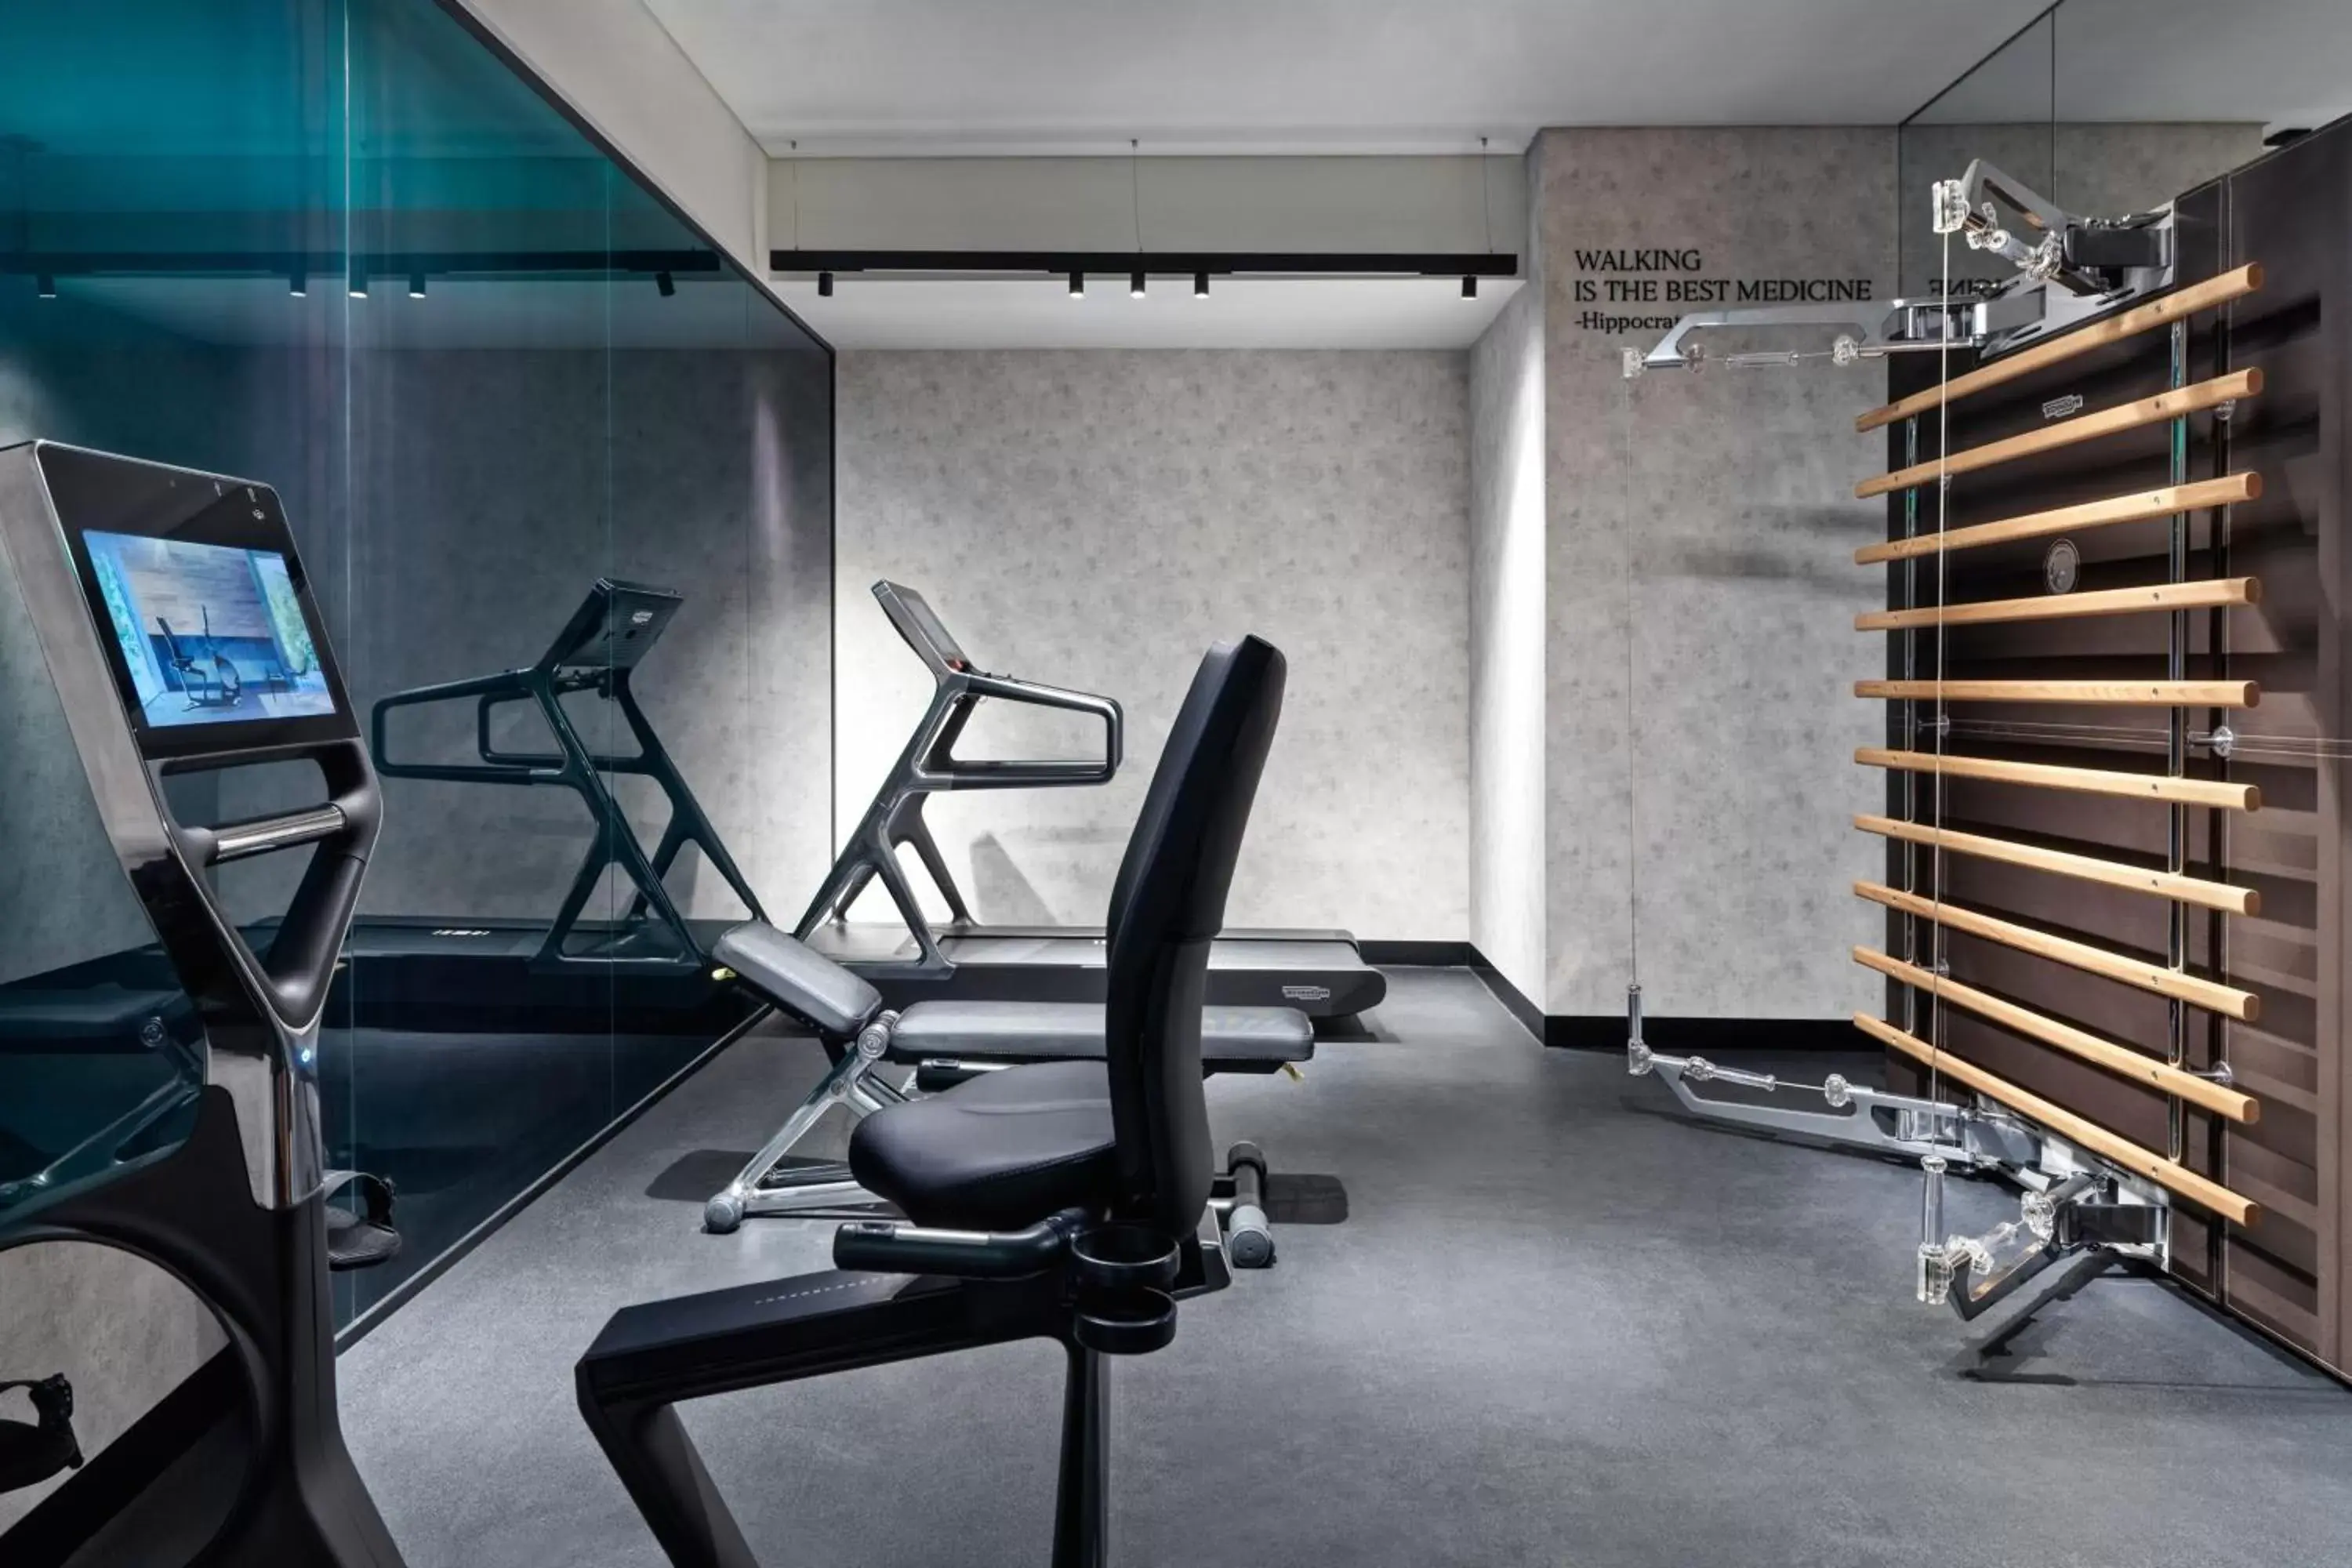 Fitness centre/facilities, Fitness Center/Facilities in Academias Hotel, Autograph Collection